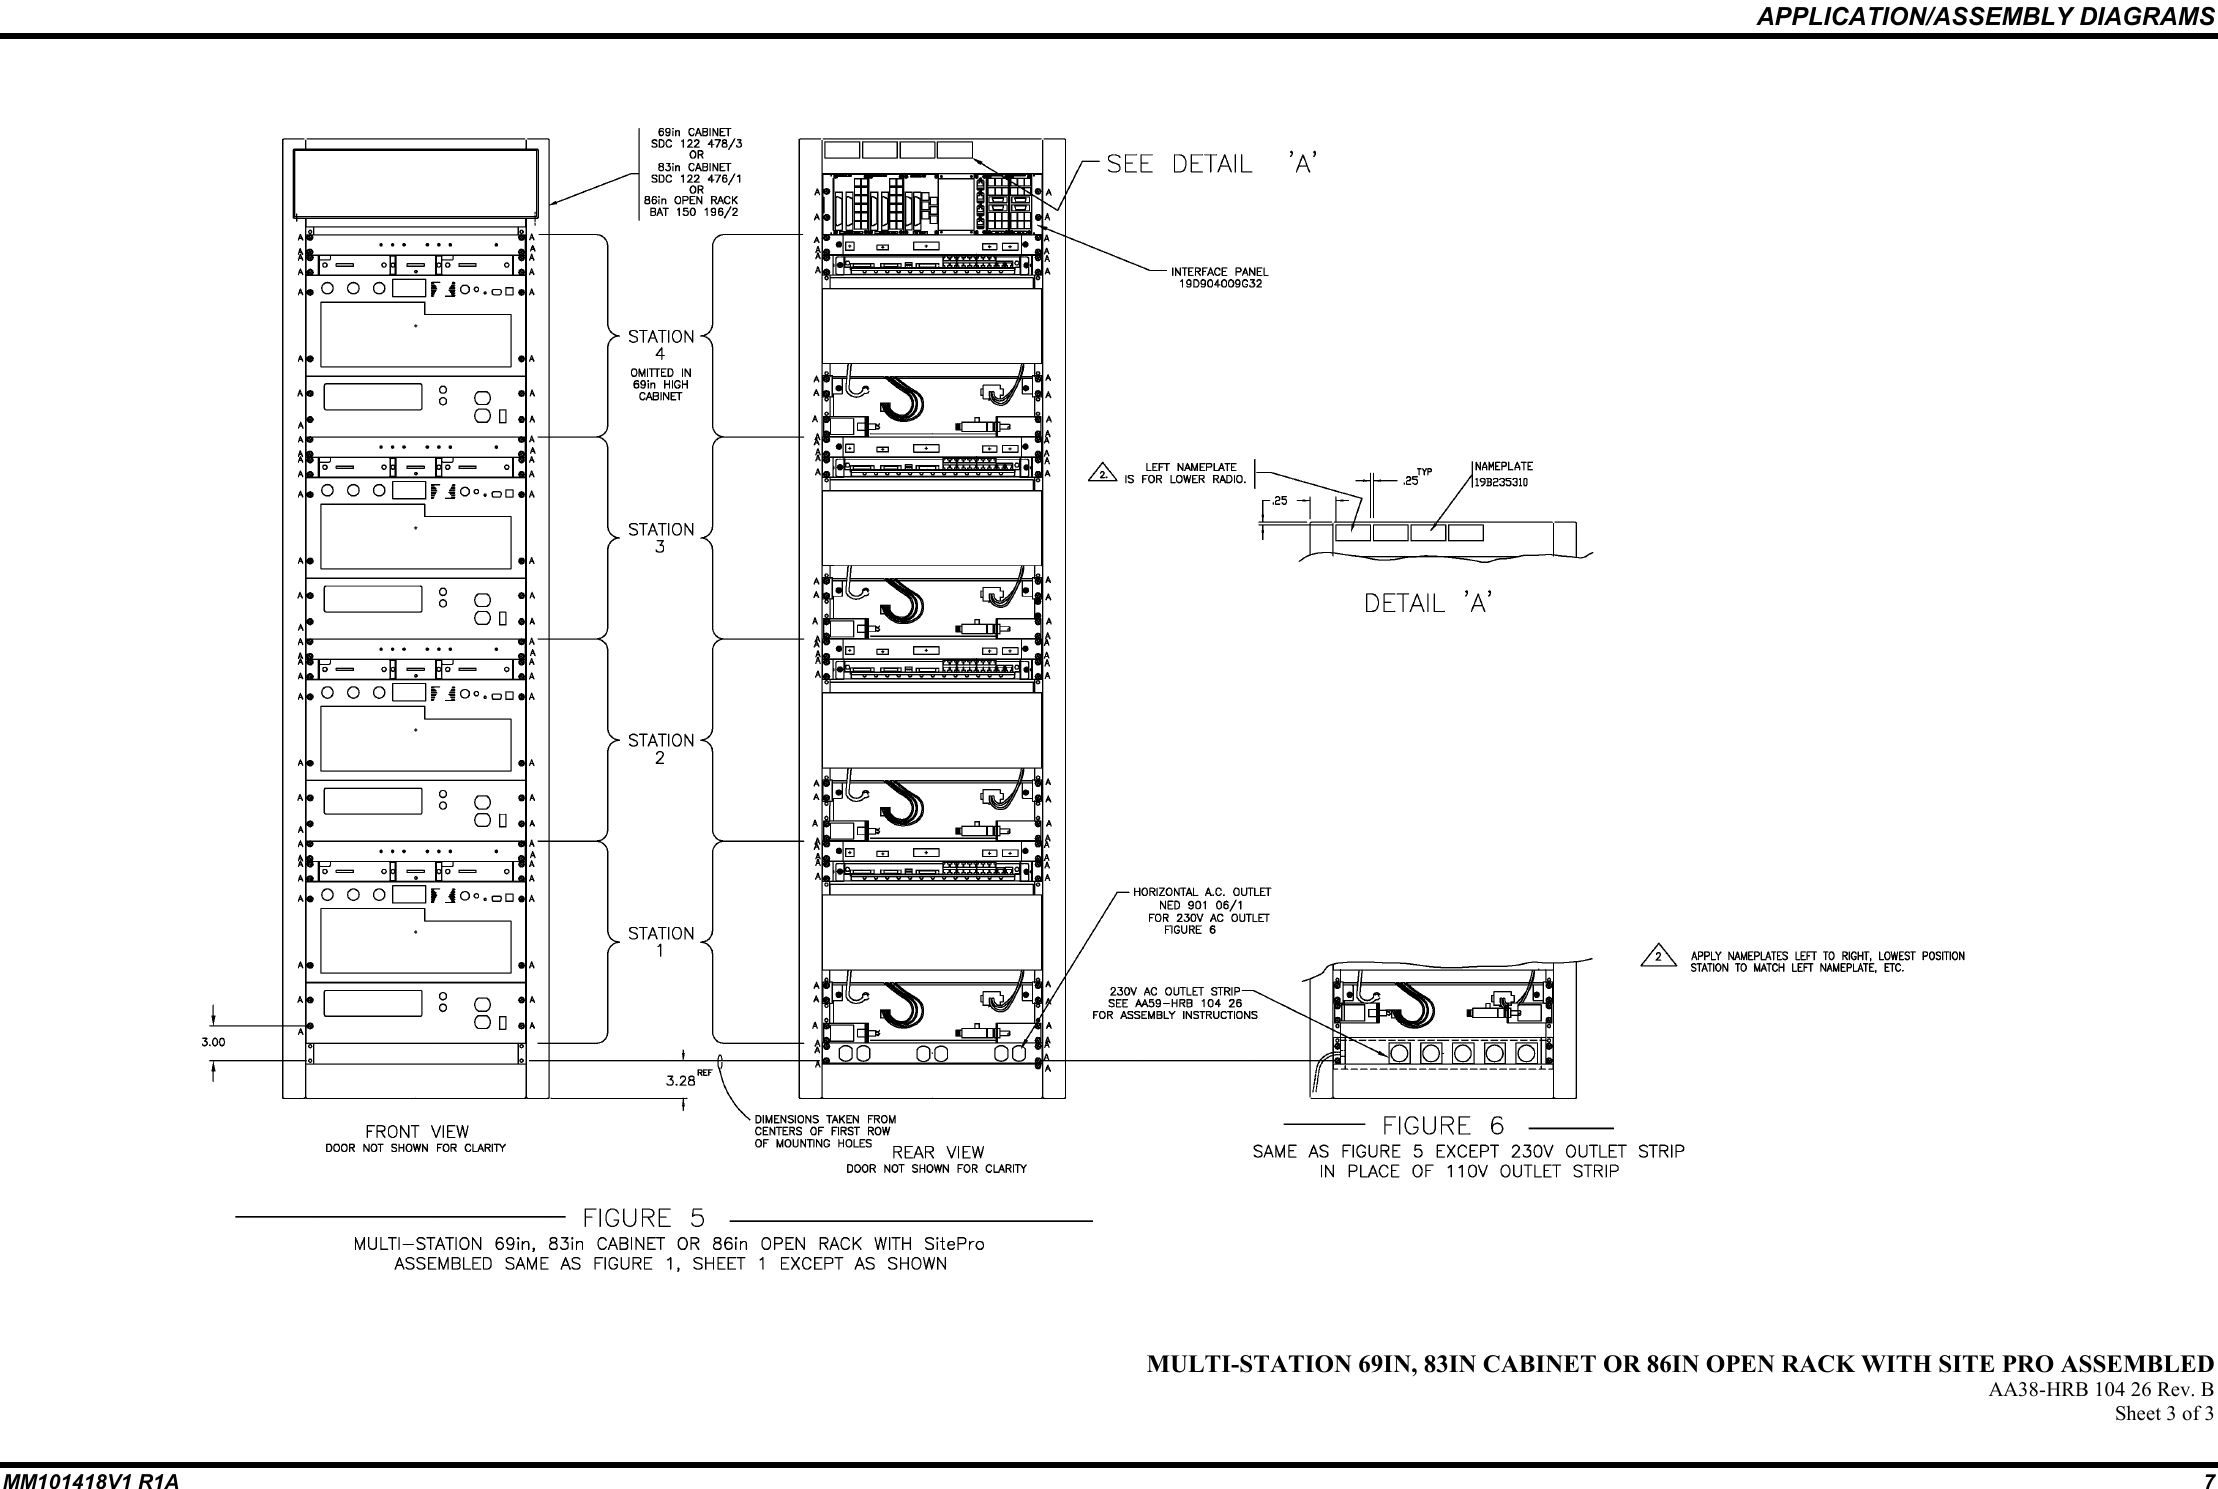 APPLICATION/ASSEMBLY DIAGRAMSMM101418V1 R1A 7MULTI-STATION 69IN, 83IN CABINET OR 86IN OPEN RACK WITH SITE PRO ASSEMBLEDAA38-HRB 104 26 Rev. BSheet 3 of 3